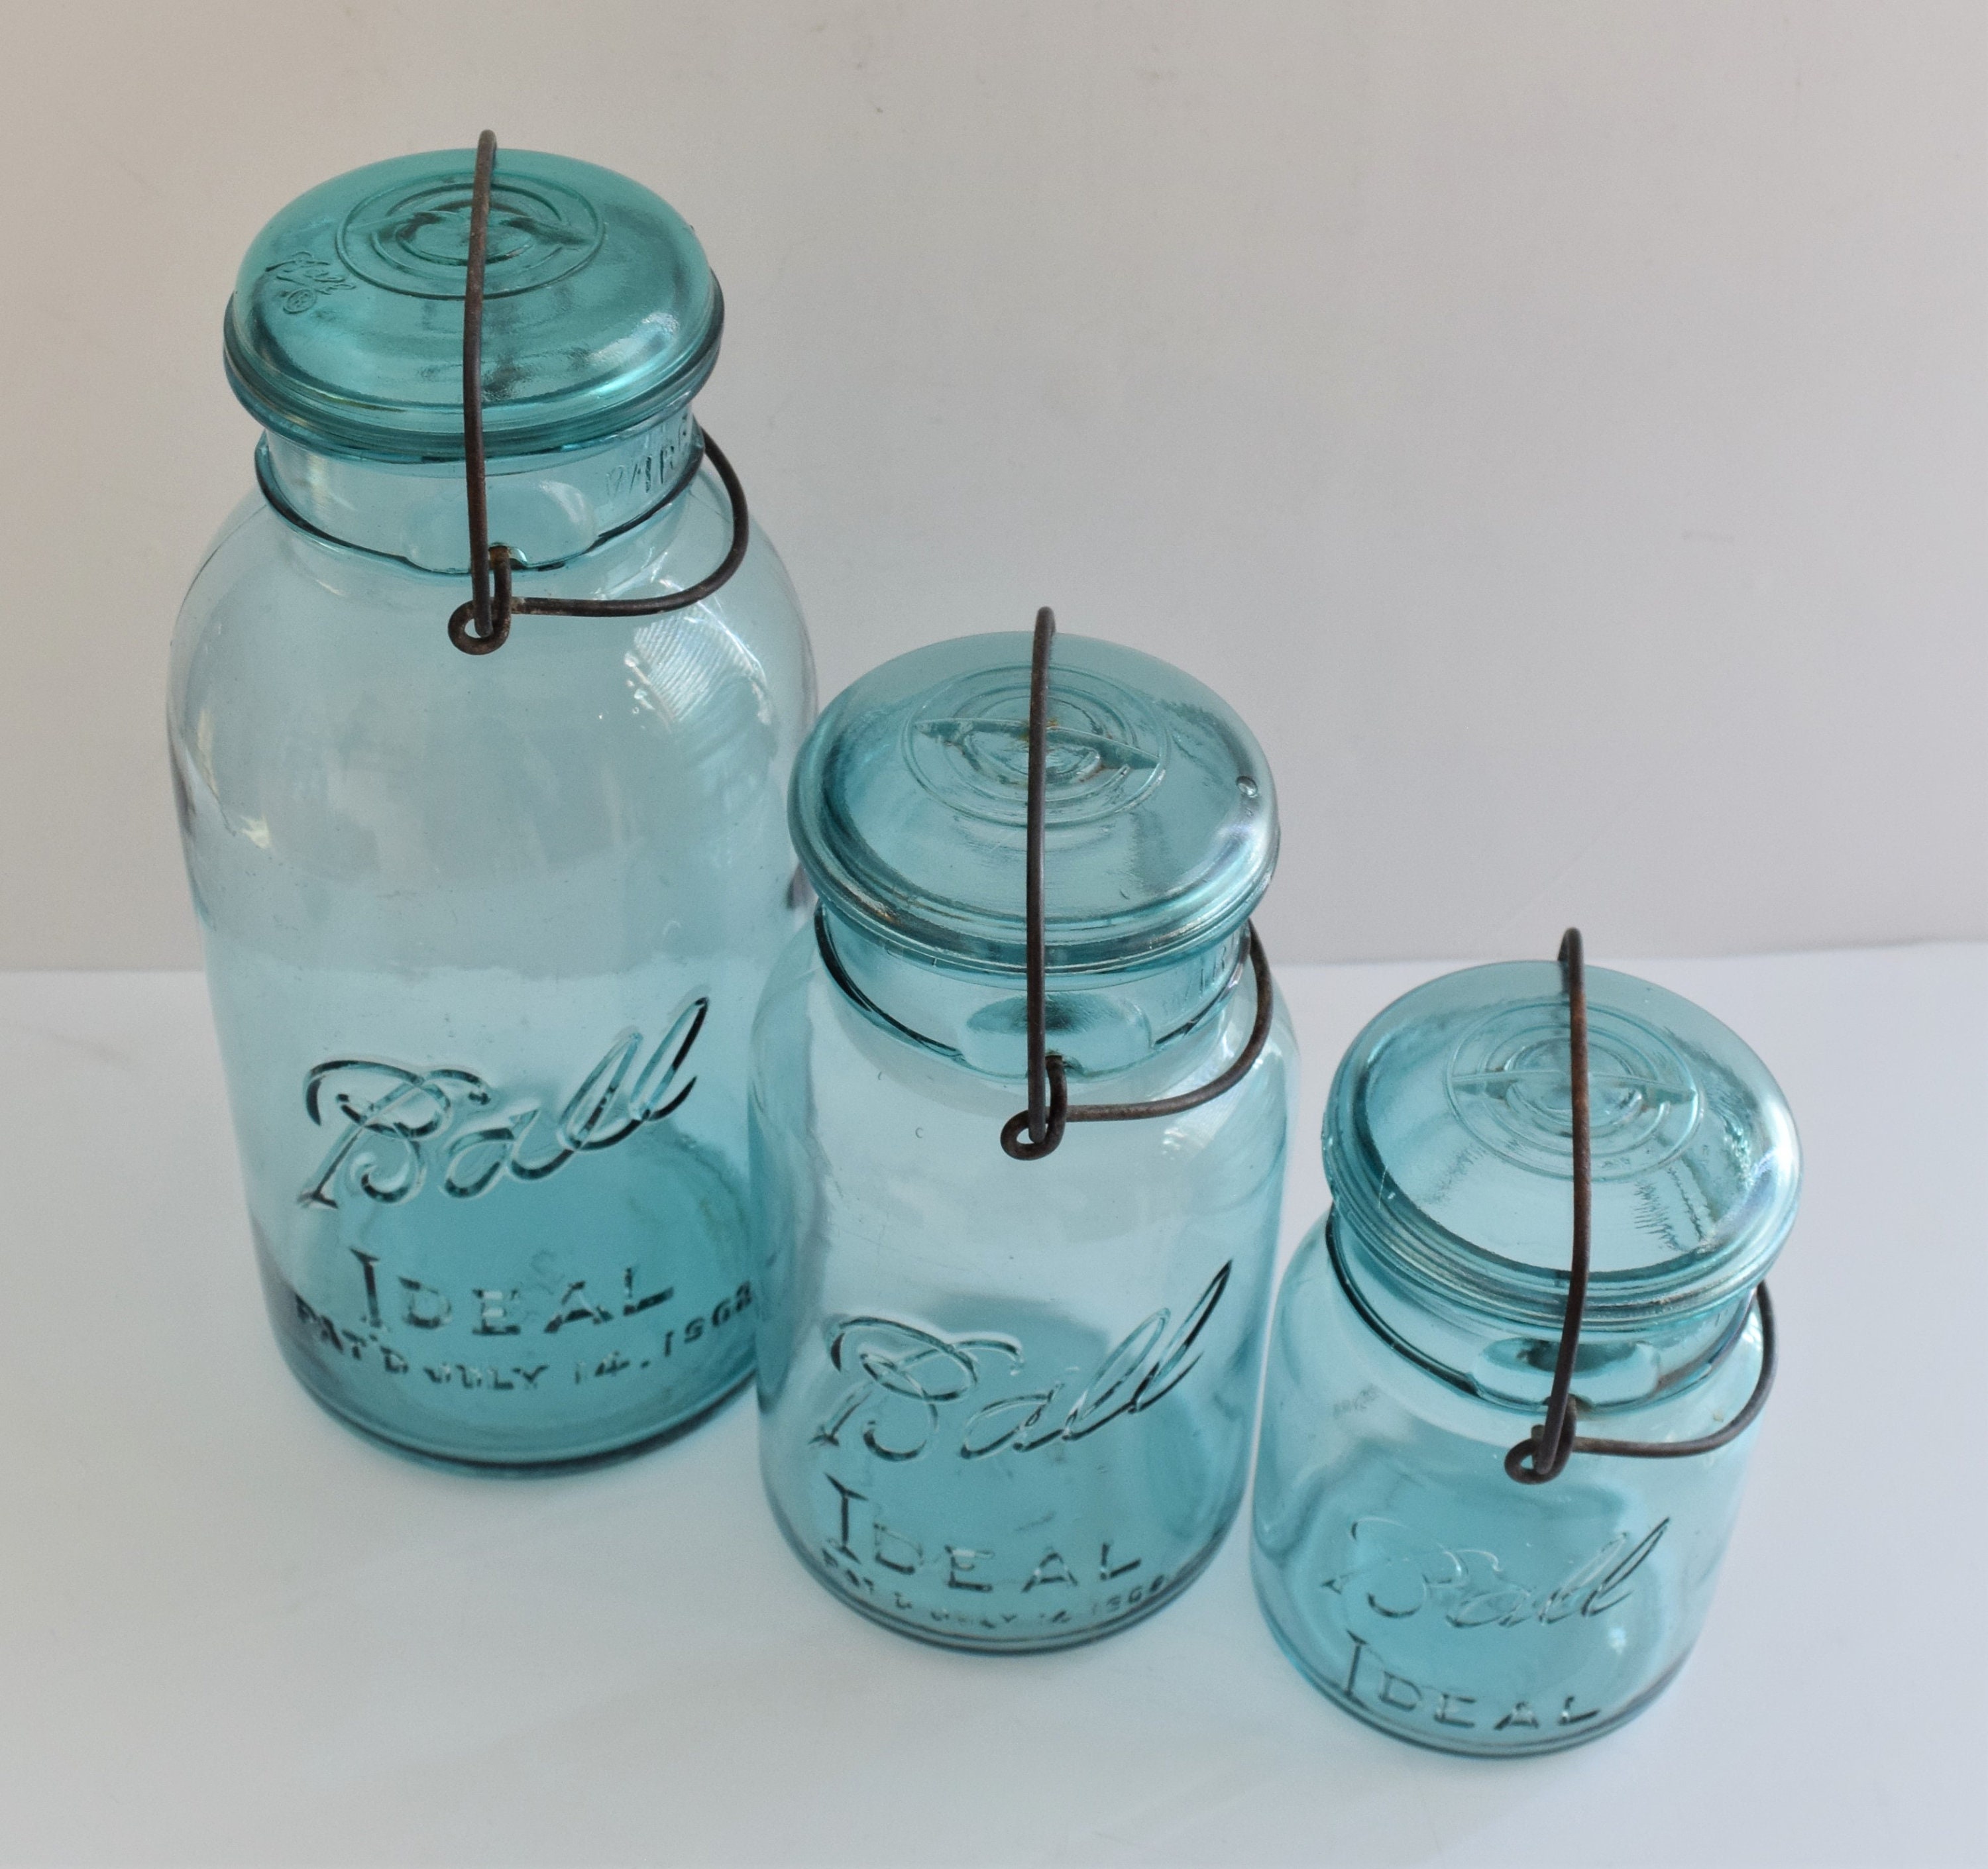 Mason Craft and More Mini Preserving Jar Set with Clamp Glass Lids